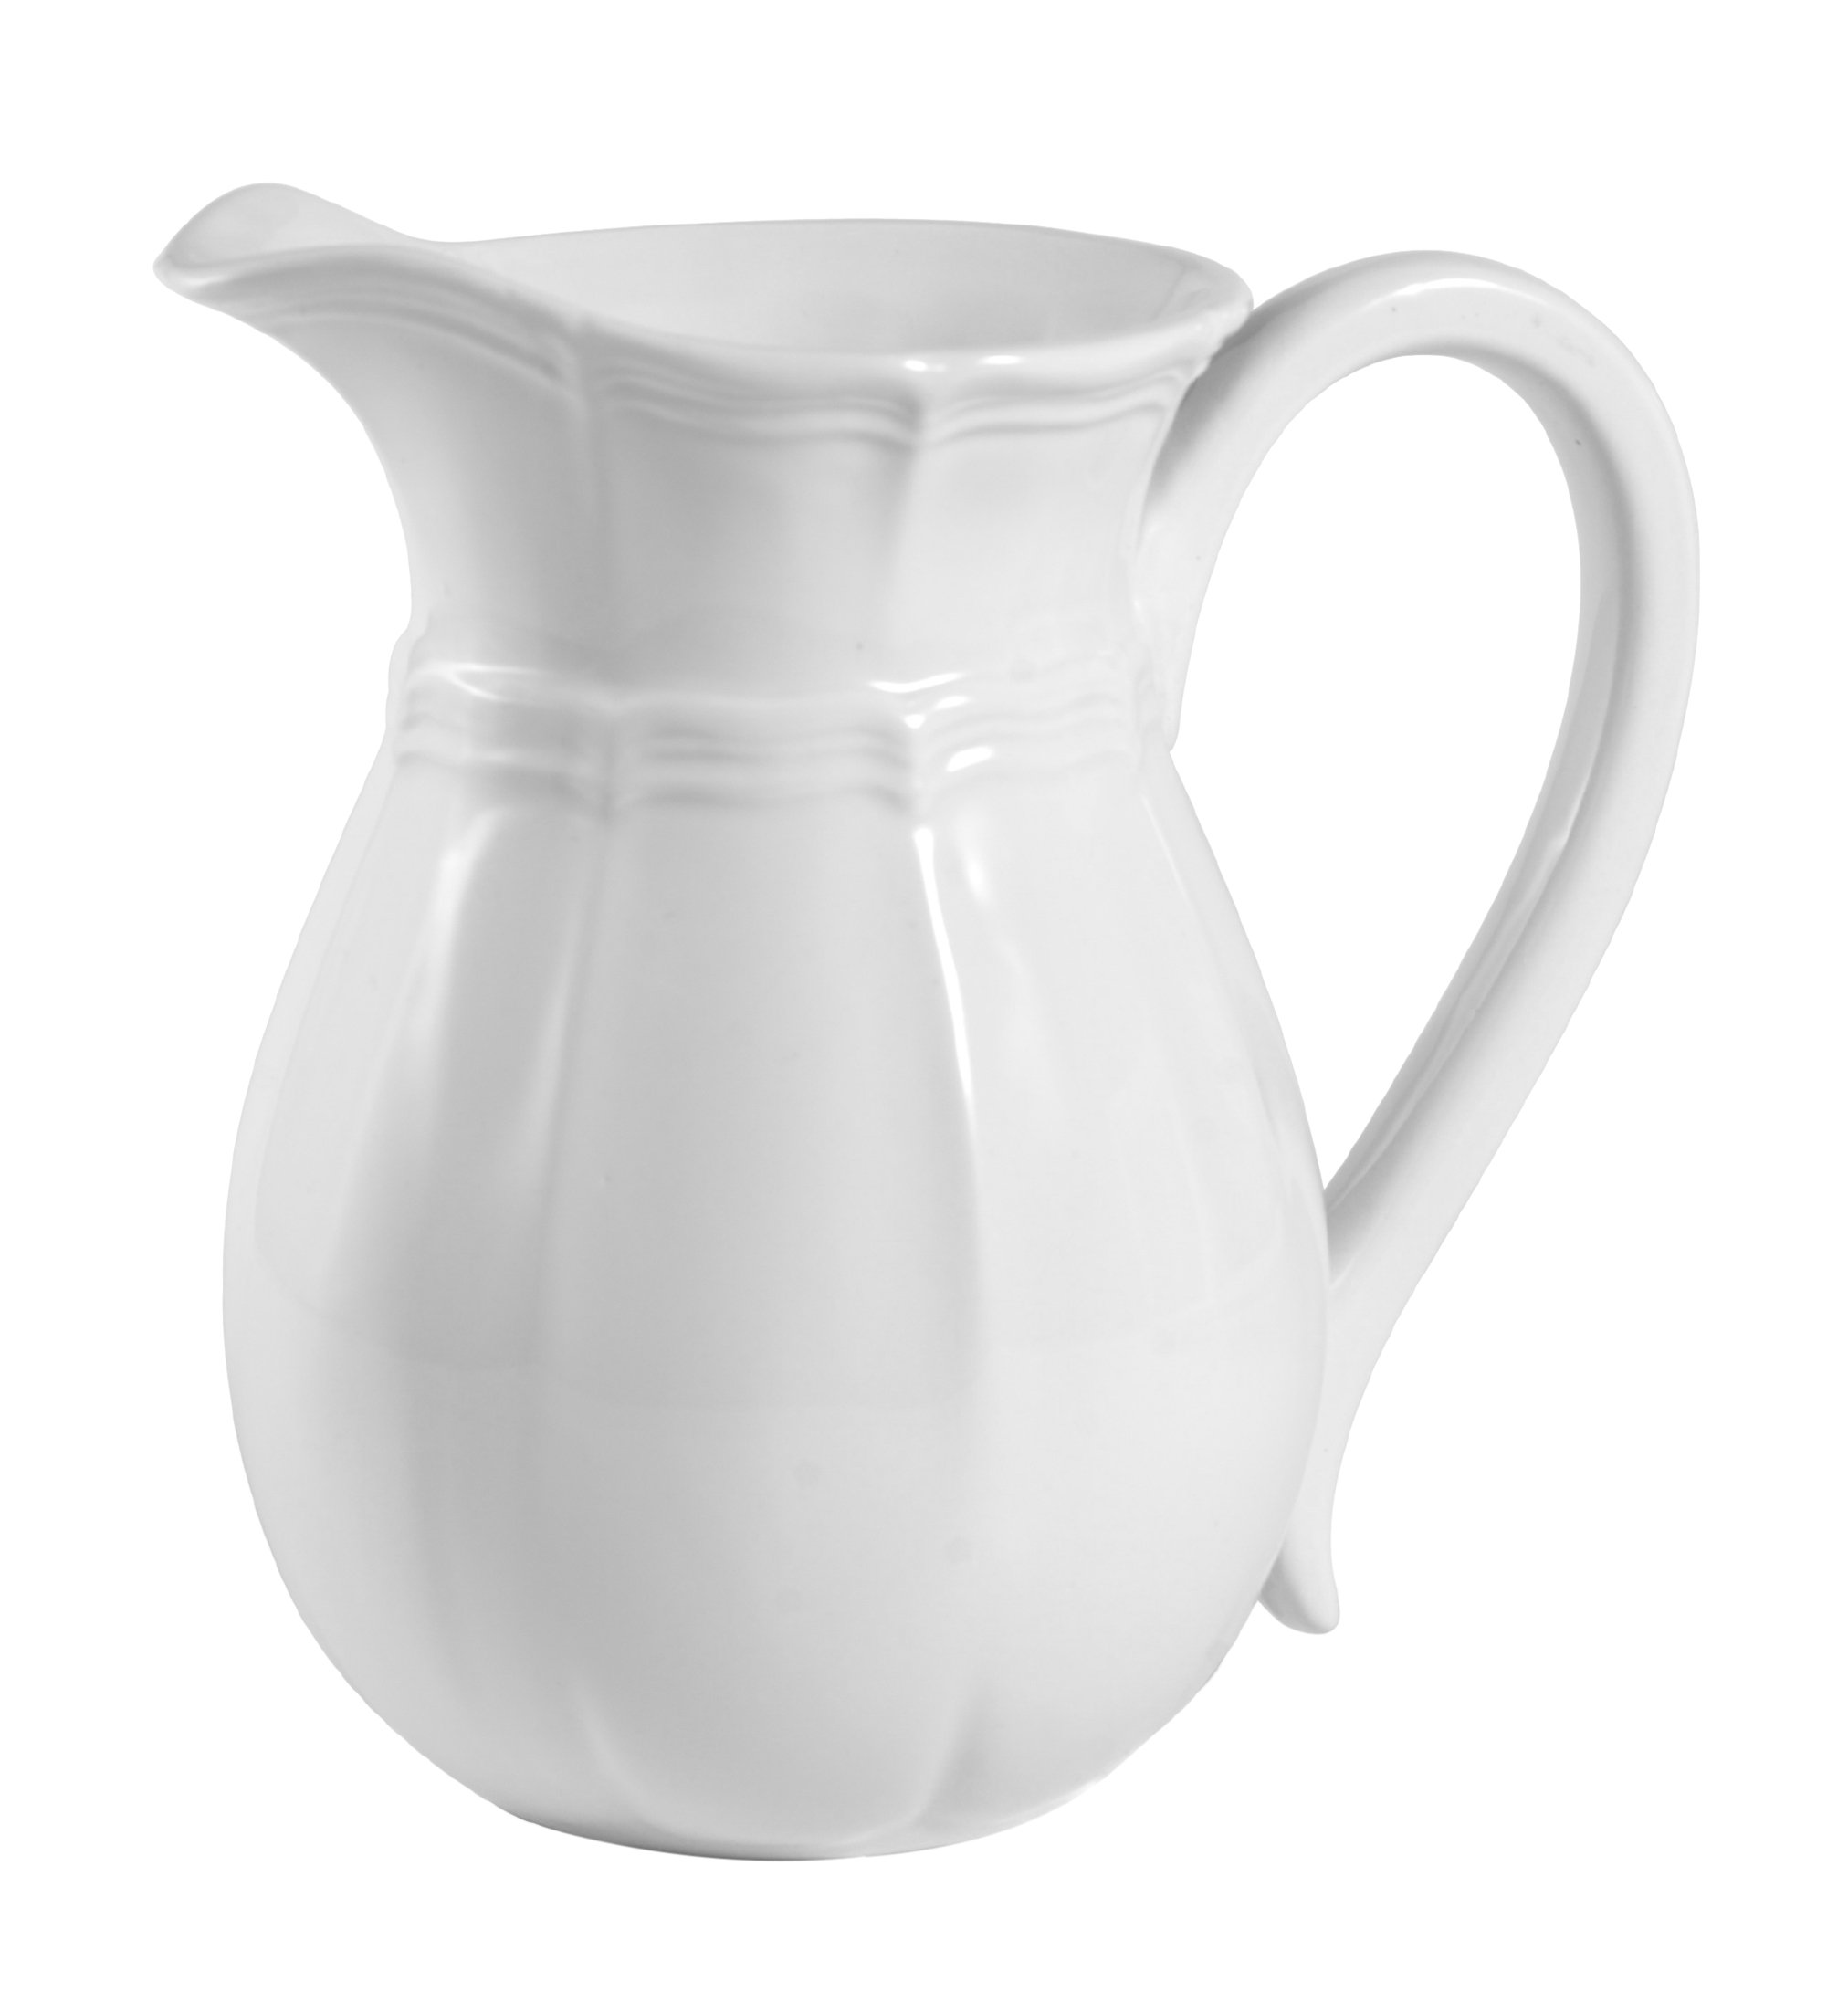 Mikasa French Countryside Pitcher, 47-Ounce, Ivory -